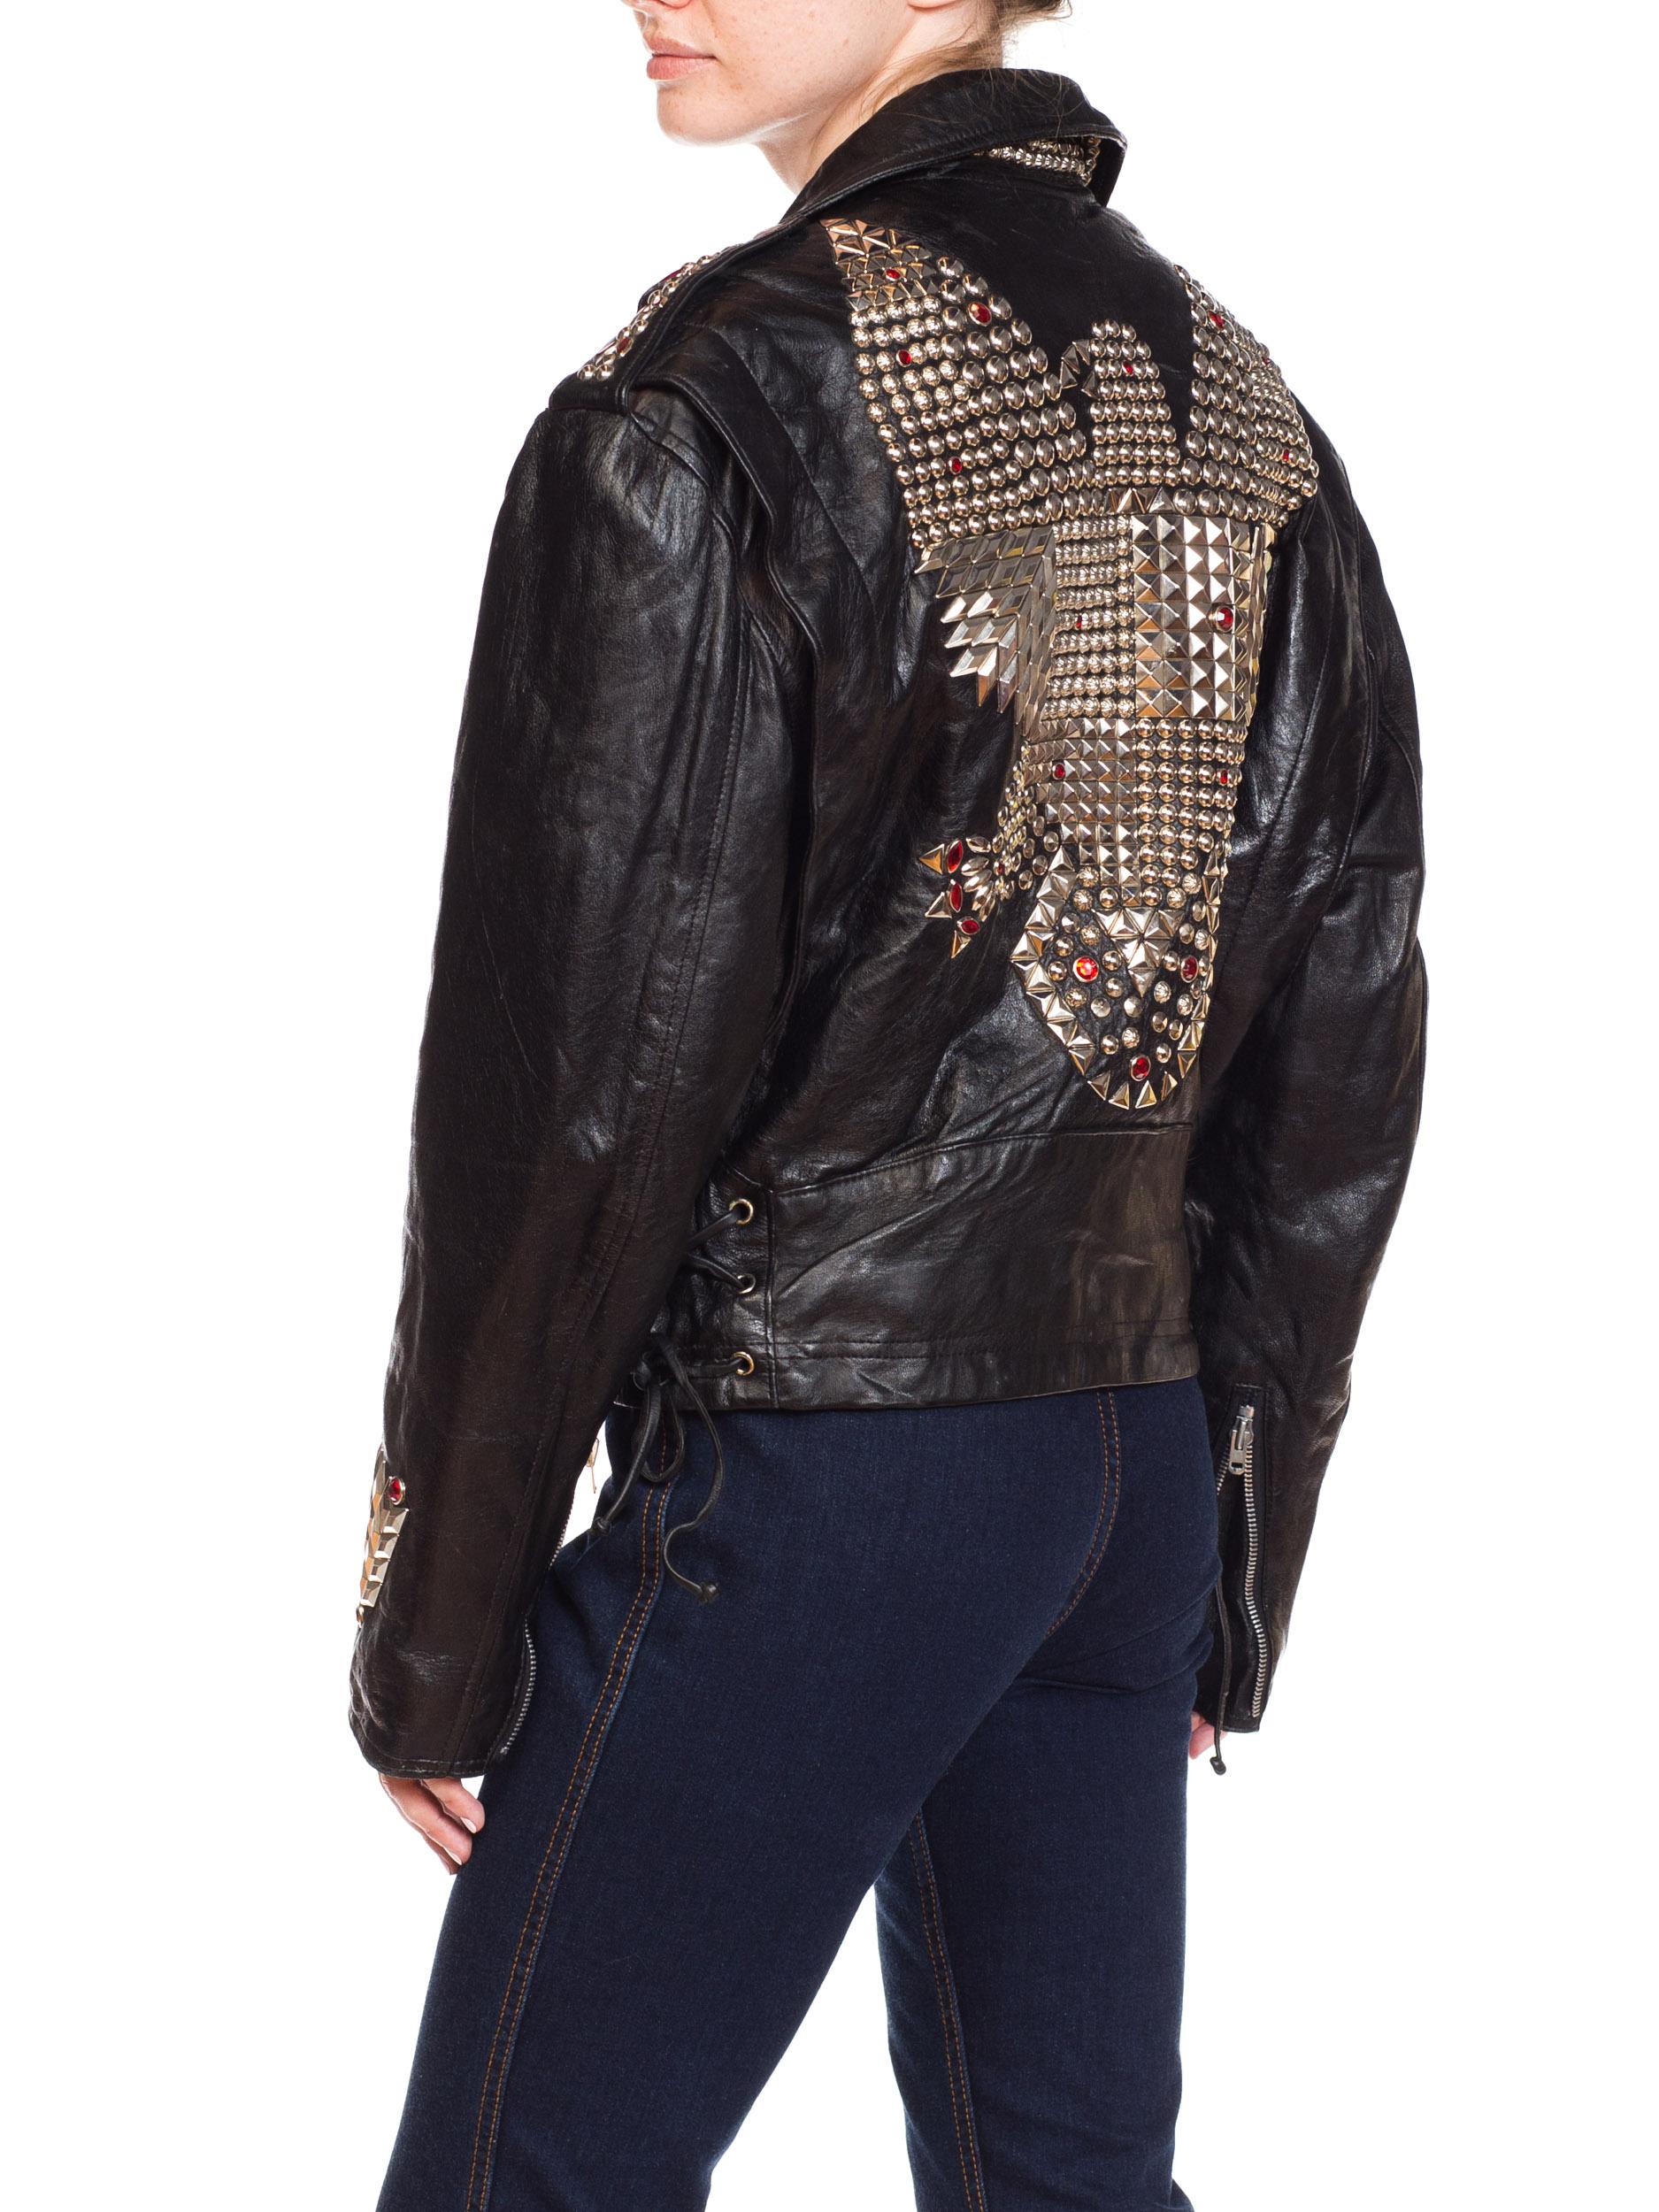 Leather Biker Jacket Covered in Studs & Crystals 5